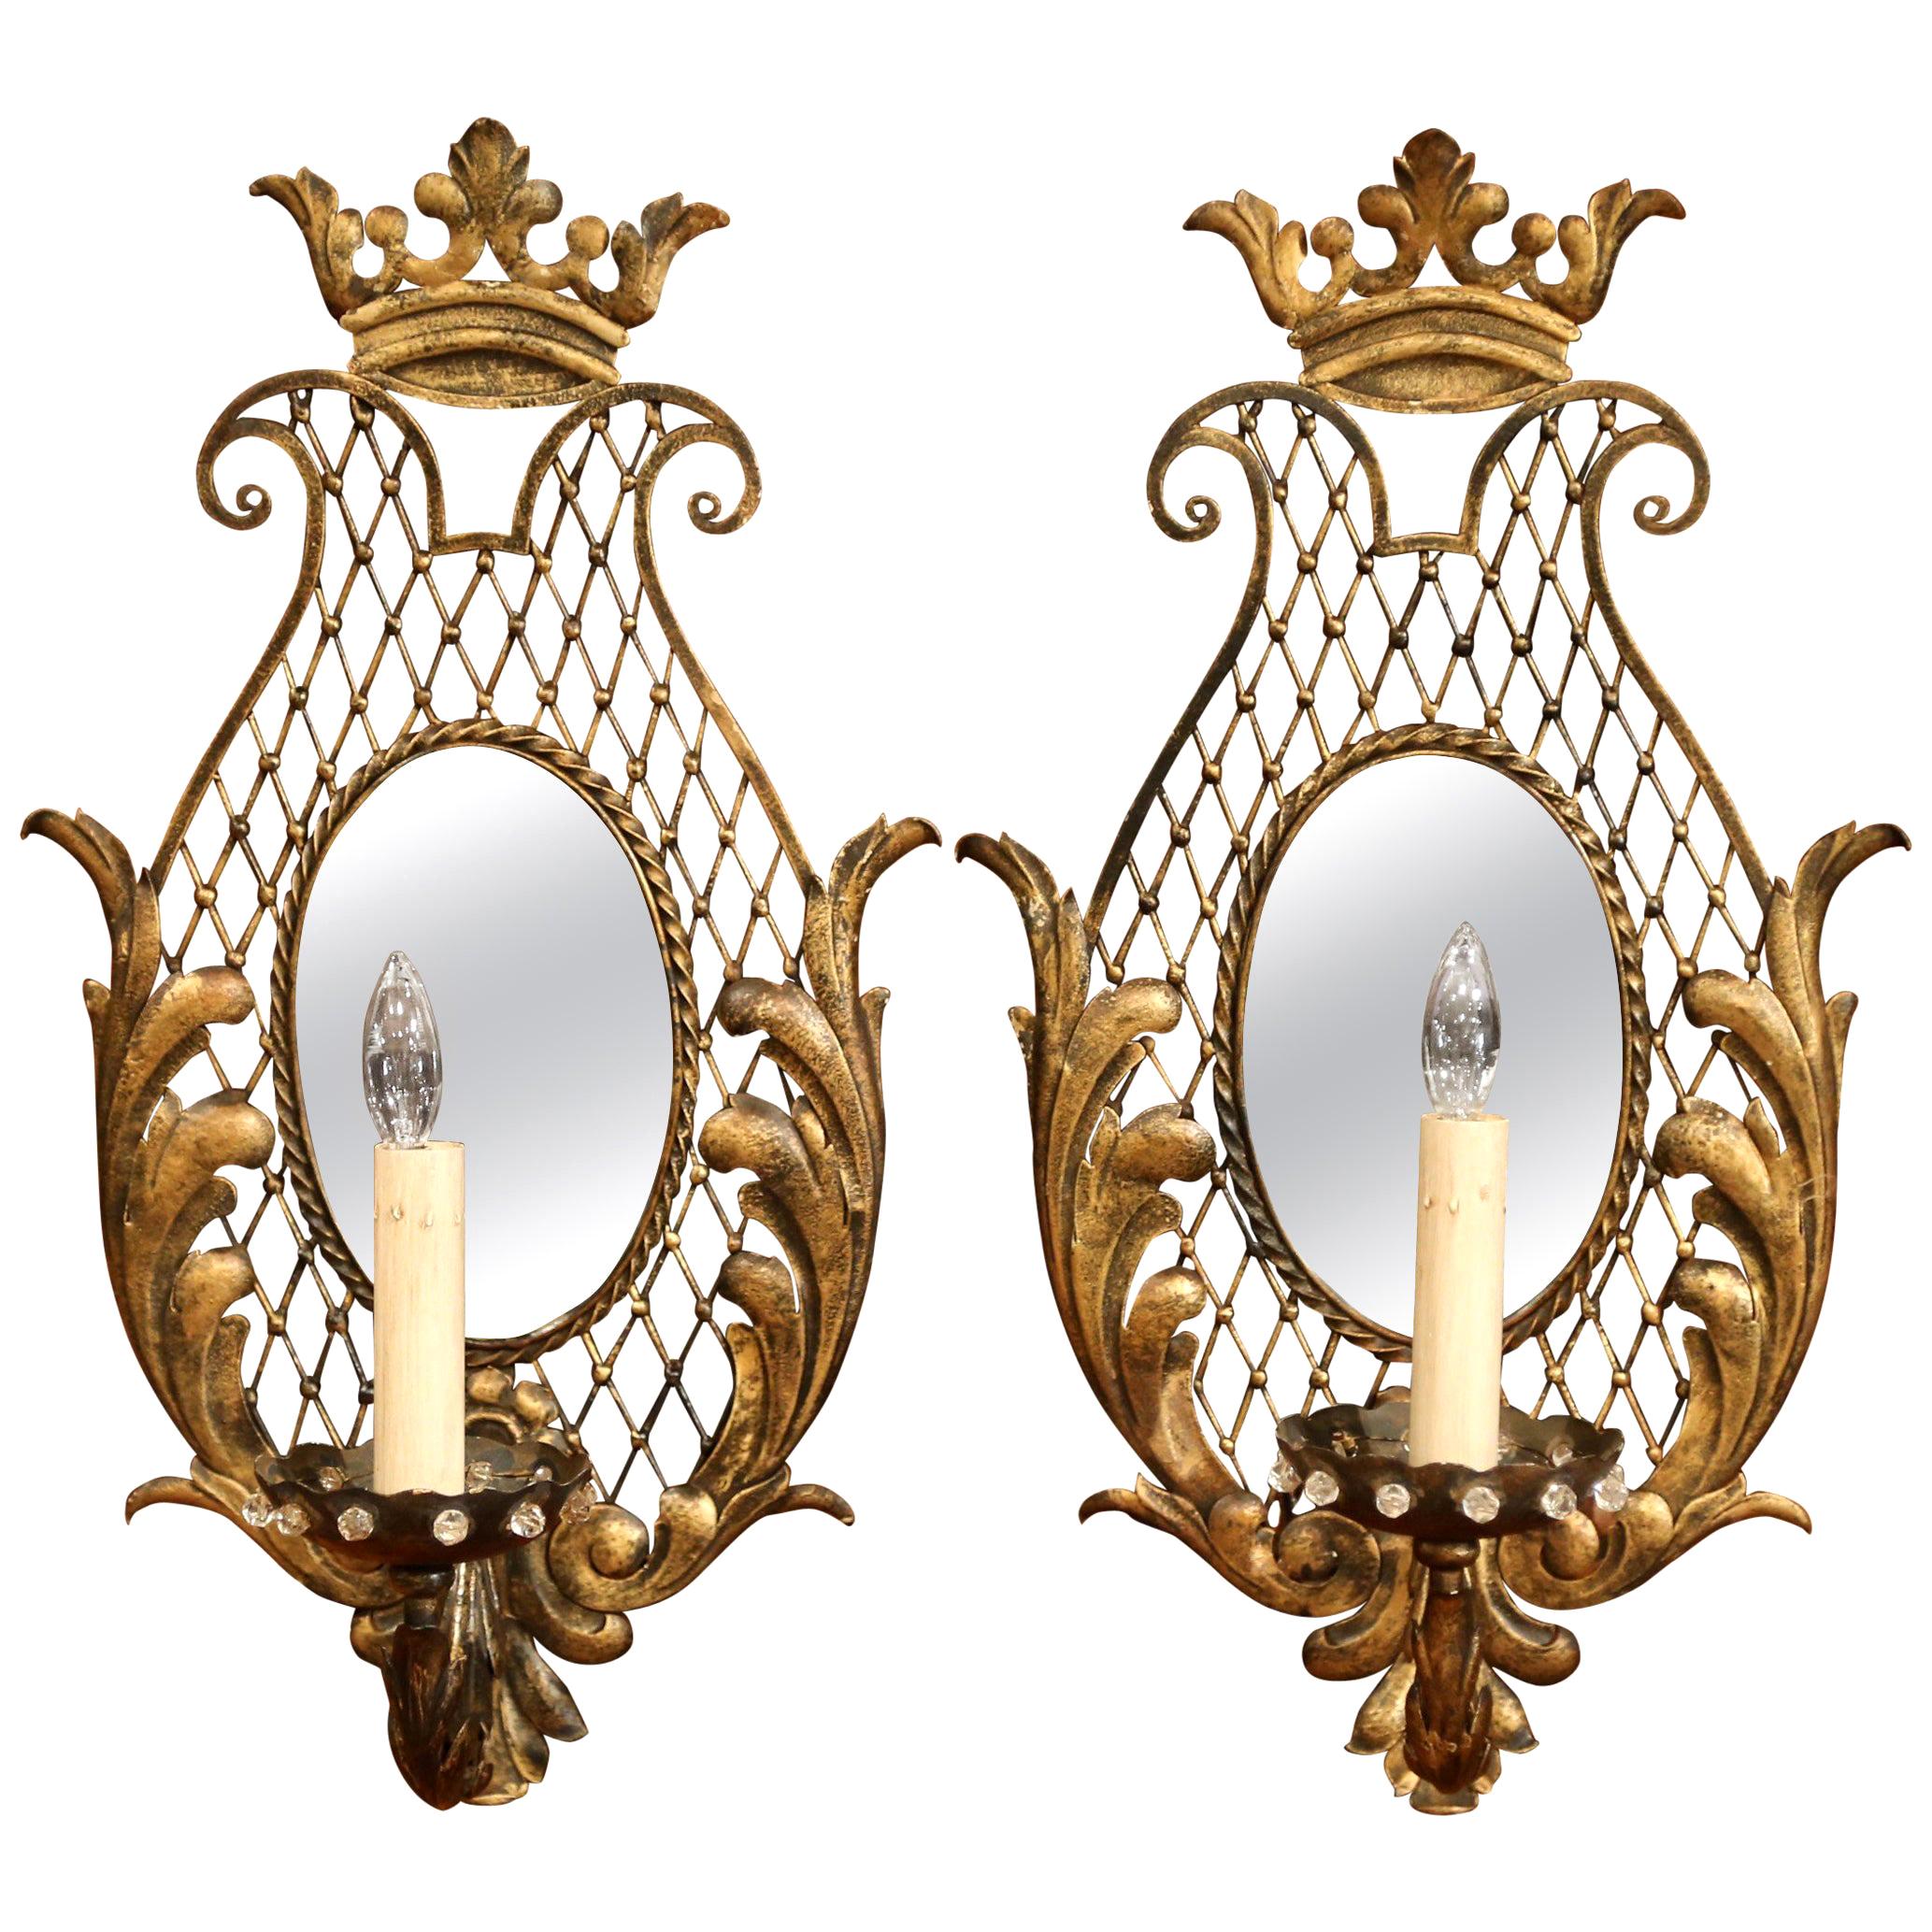 Pair of Early 20th Century French Iron Crystal and Mirrored Wall Sconces